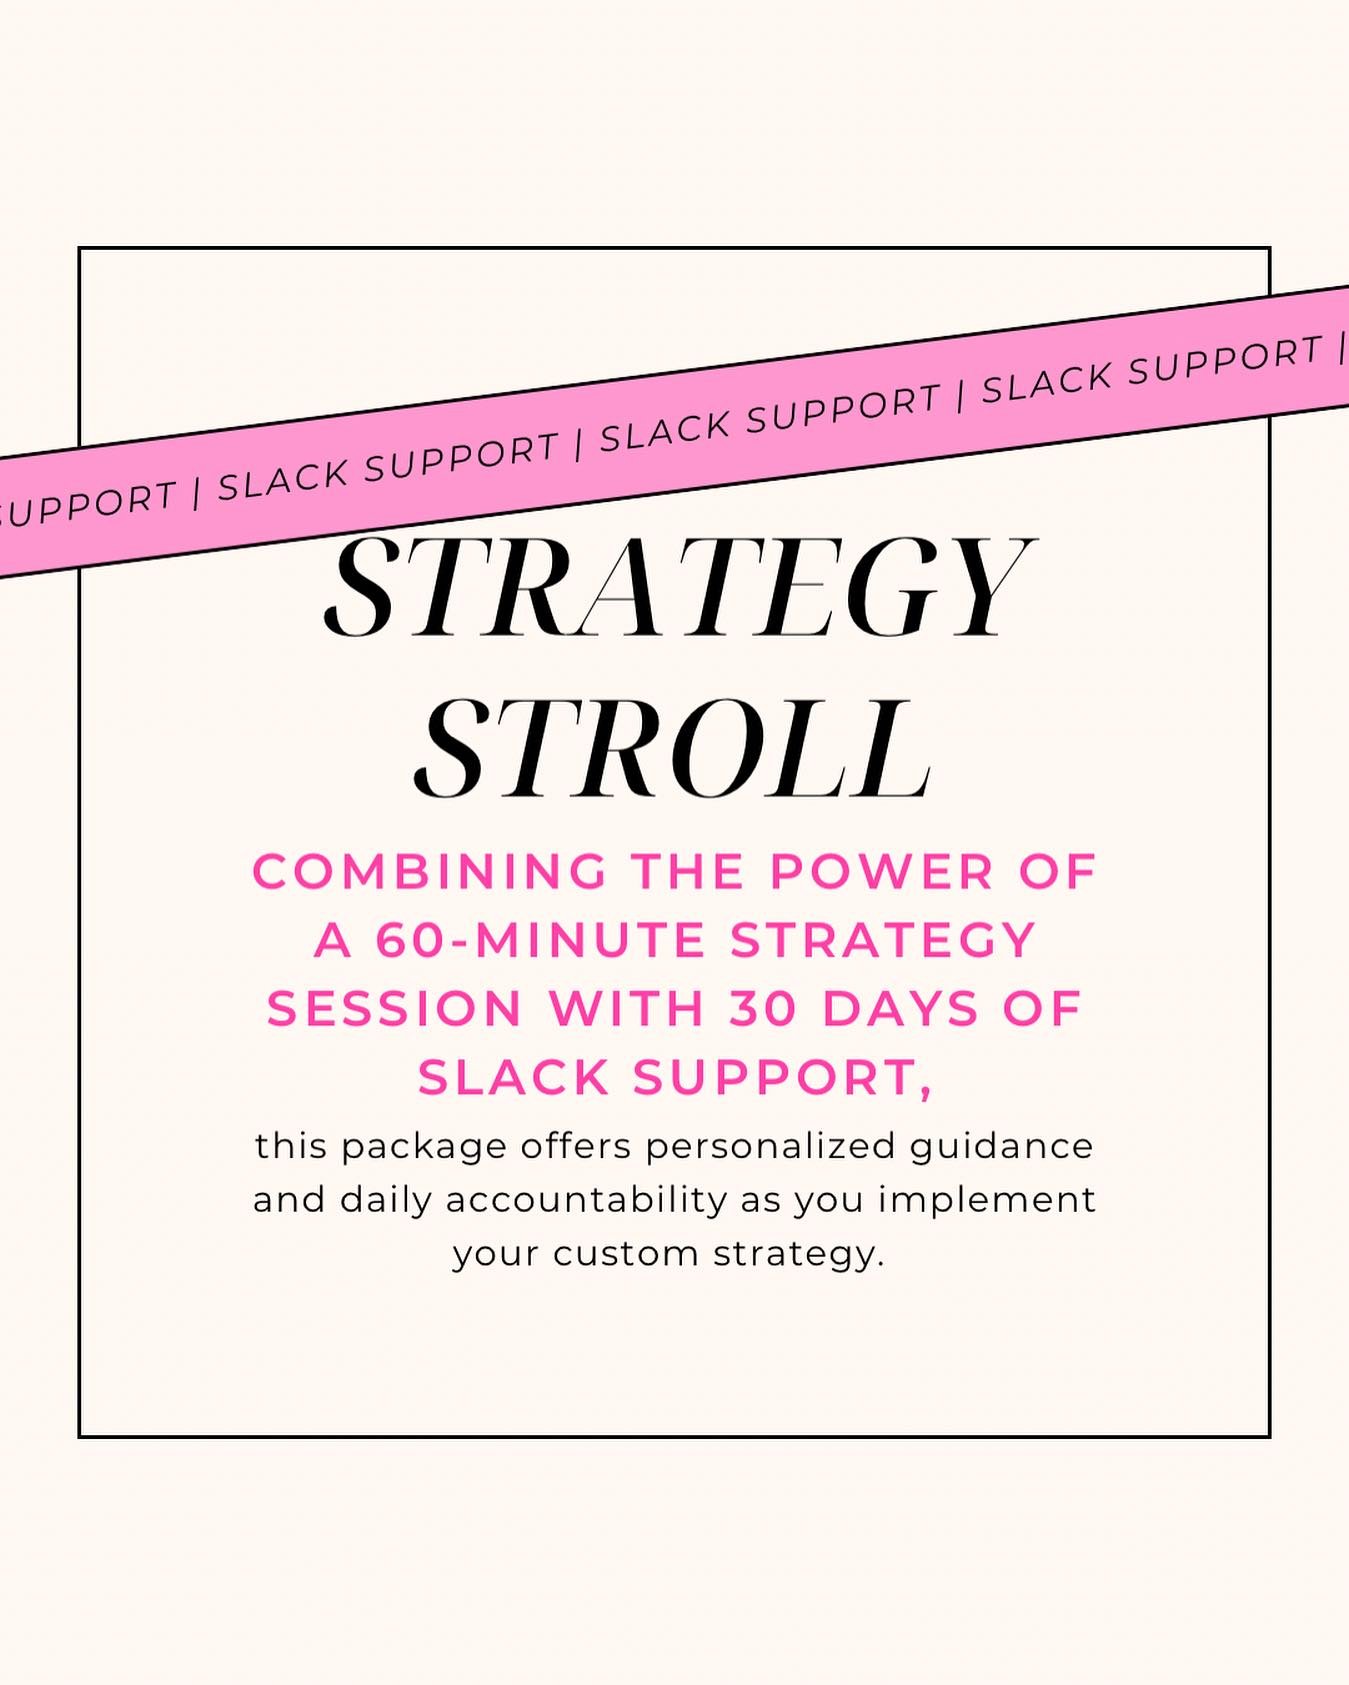 Exciting news! The Strategy Stroll is officially available for booking! 🚶&zwj;♀️

Imagine this: an hour-long, personalized strategy session PLUS 30 days of Slack support to keep you on track and motivated. It&rsquo;s like having your very own busine